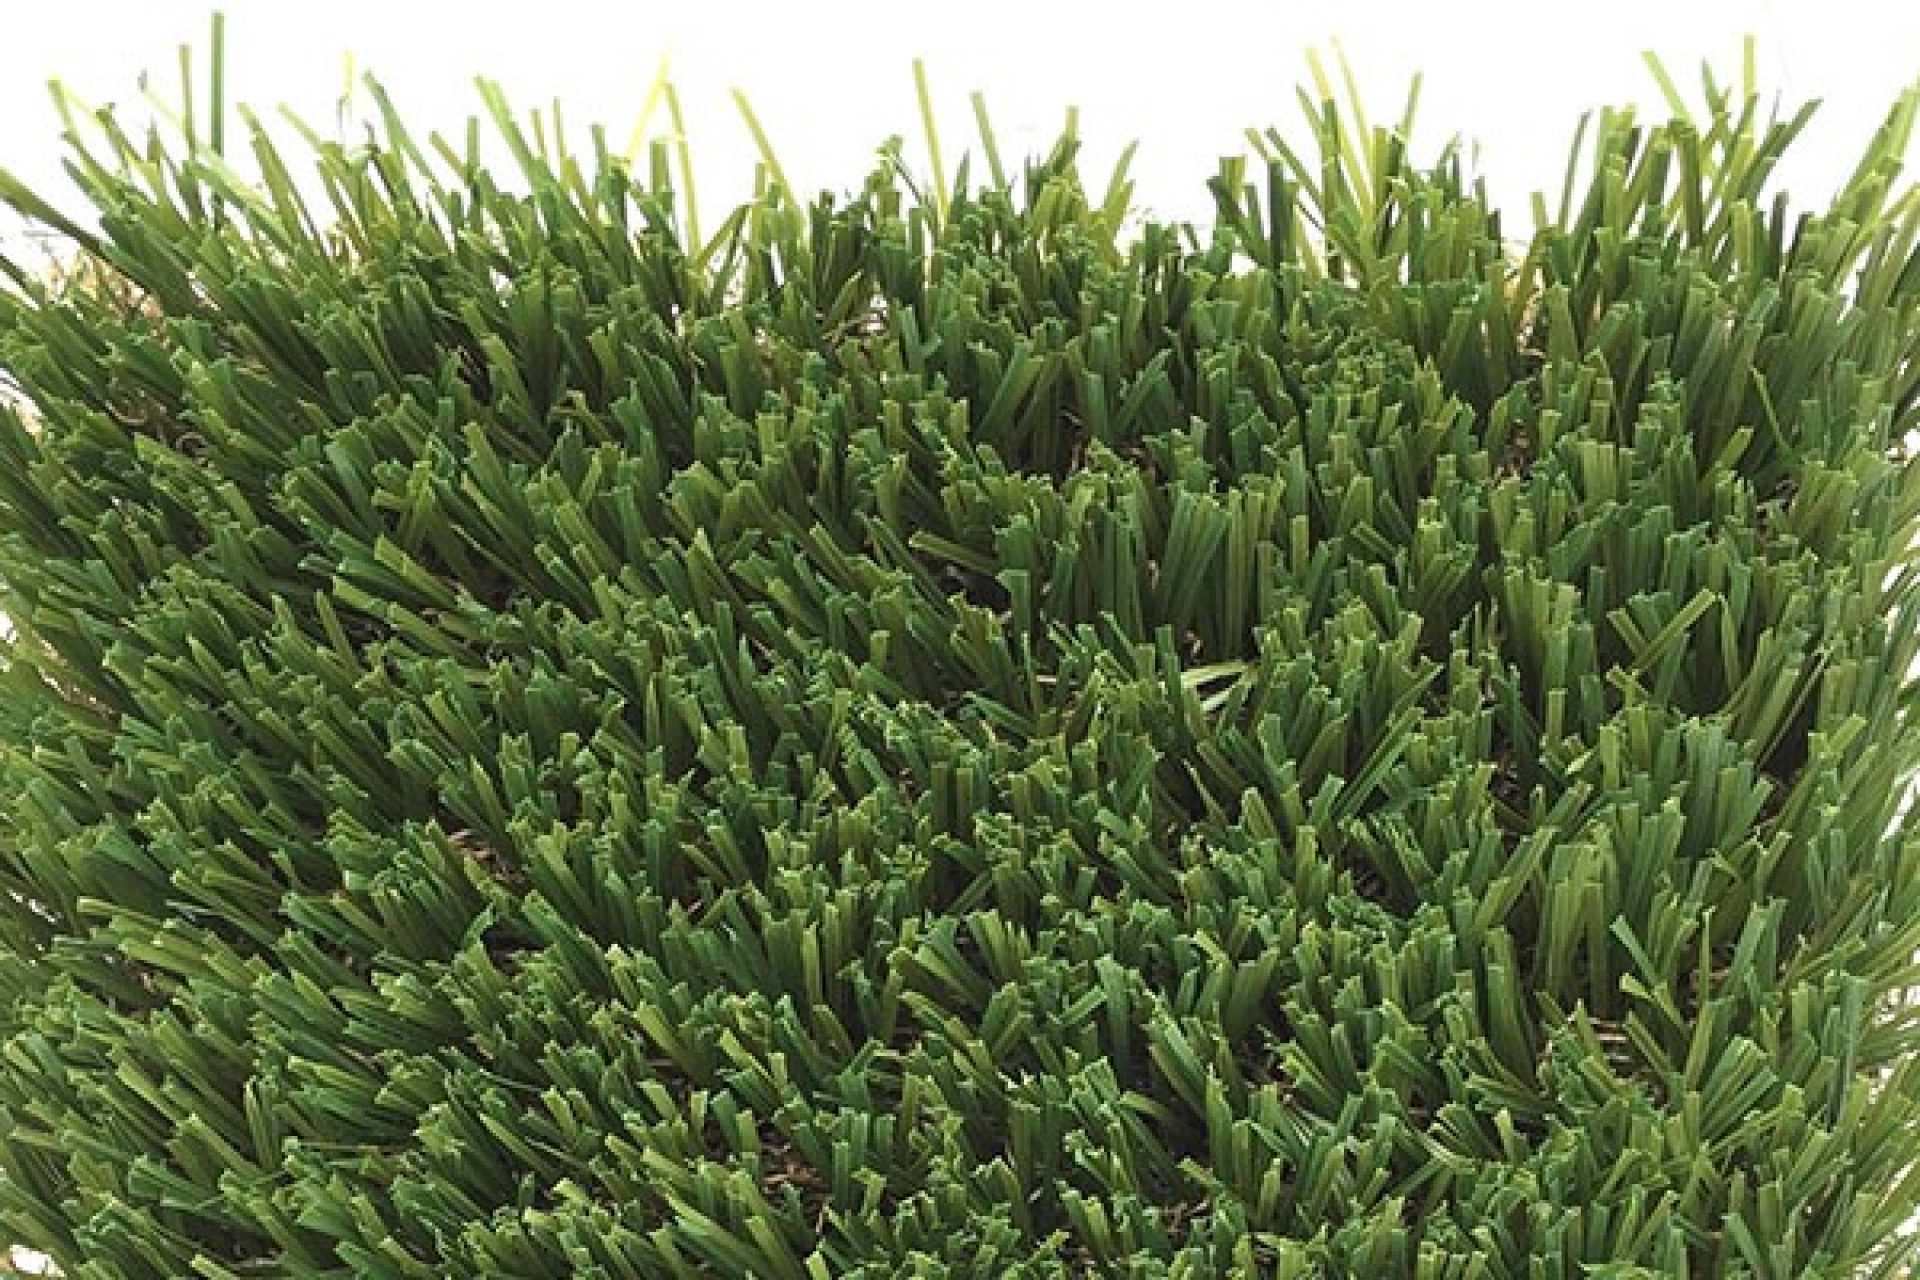 Designed with Bella Turf’s ultra Soft S-blade technology, Coastal Pro offers one of the softest artificial grass products available. If play is on your mind, Coastal Pro is for you!